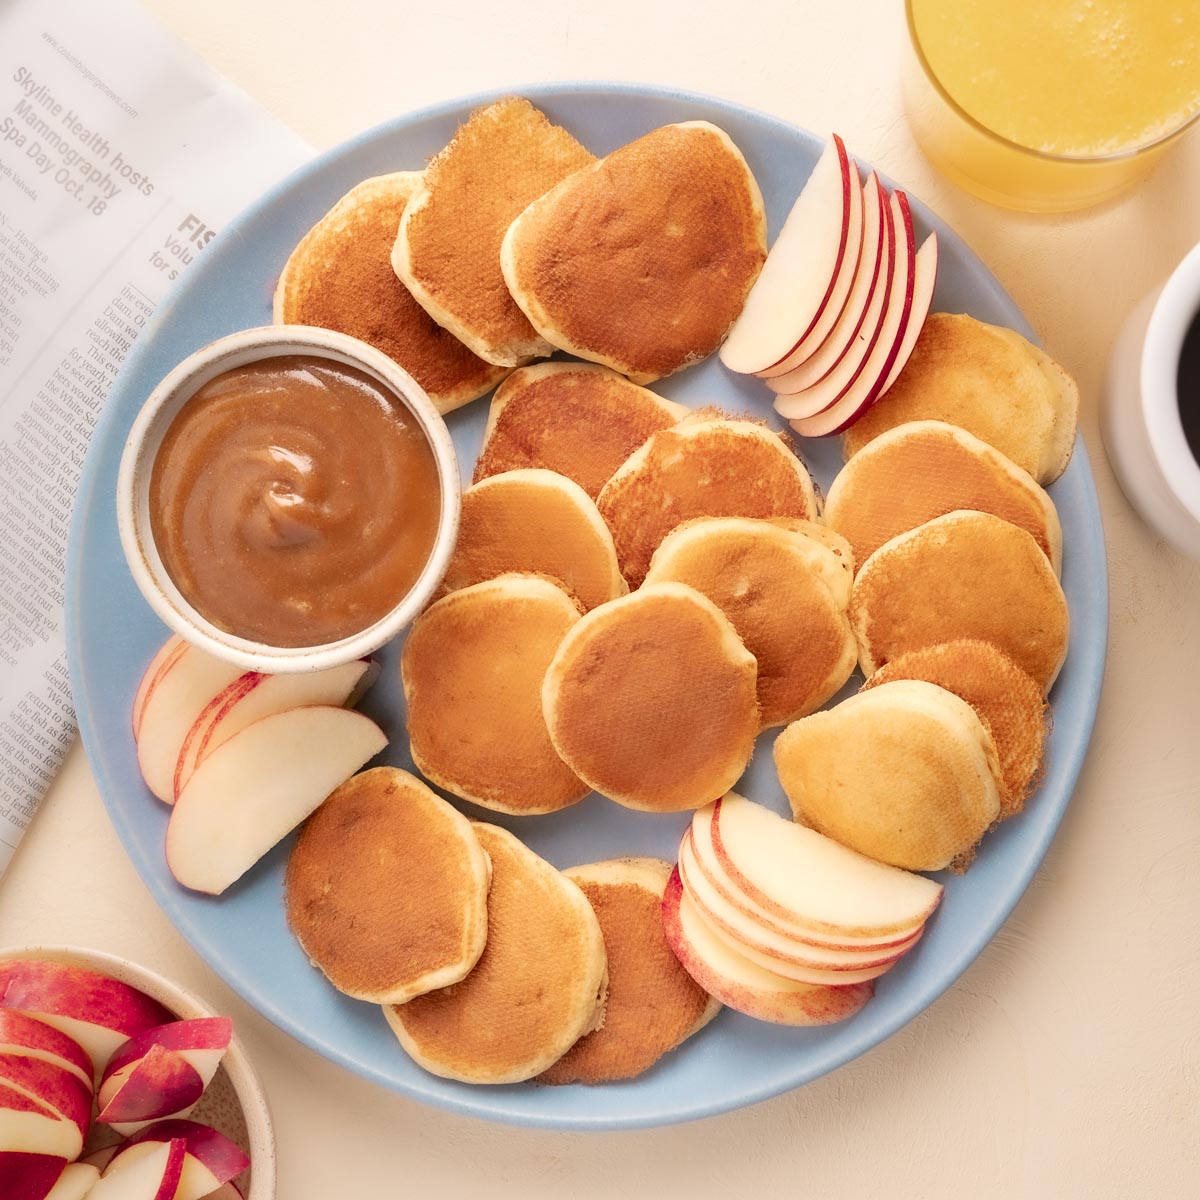 Mini Pancakes on a blue plate with Vanilla Cinnamon Peanut Butter Maple Syrup in a small white bowl on the plate. Red sliced apples are also shown as dippers for the peanut butter syrup. 